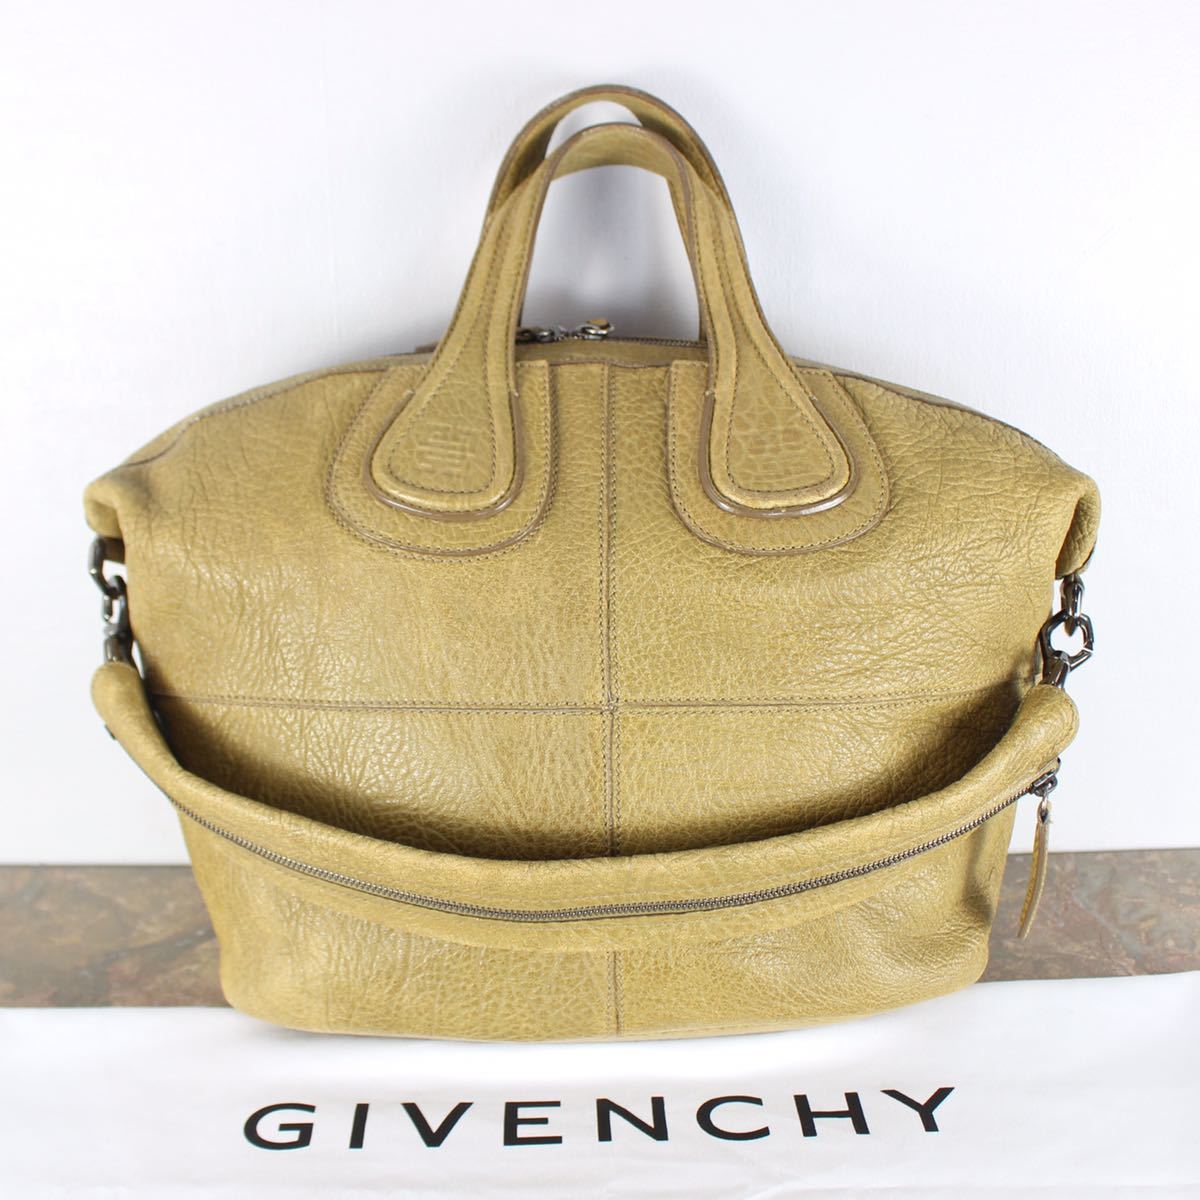 GIVENCHY NIGHTINGALE LEATHER 2WAY SHOULDER BAG MADE IN ITALY